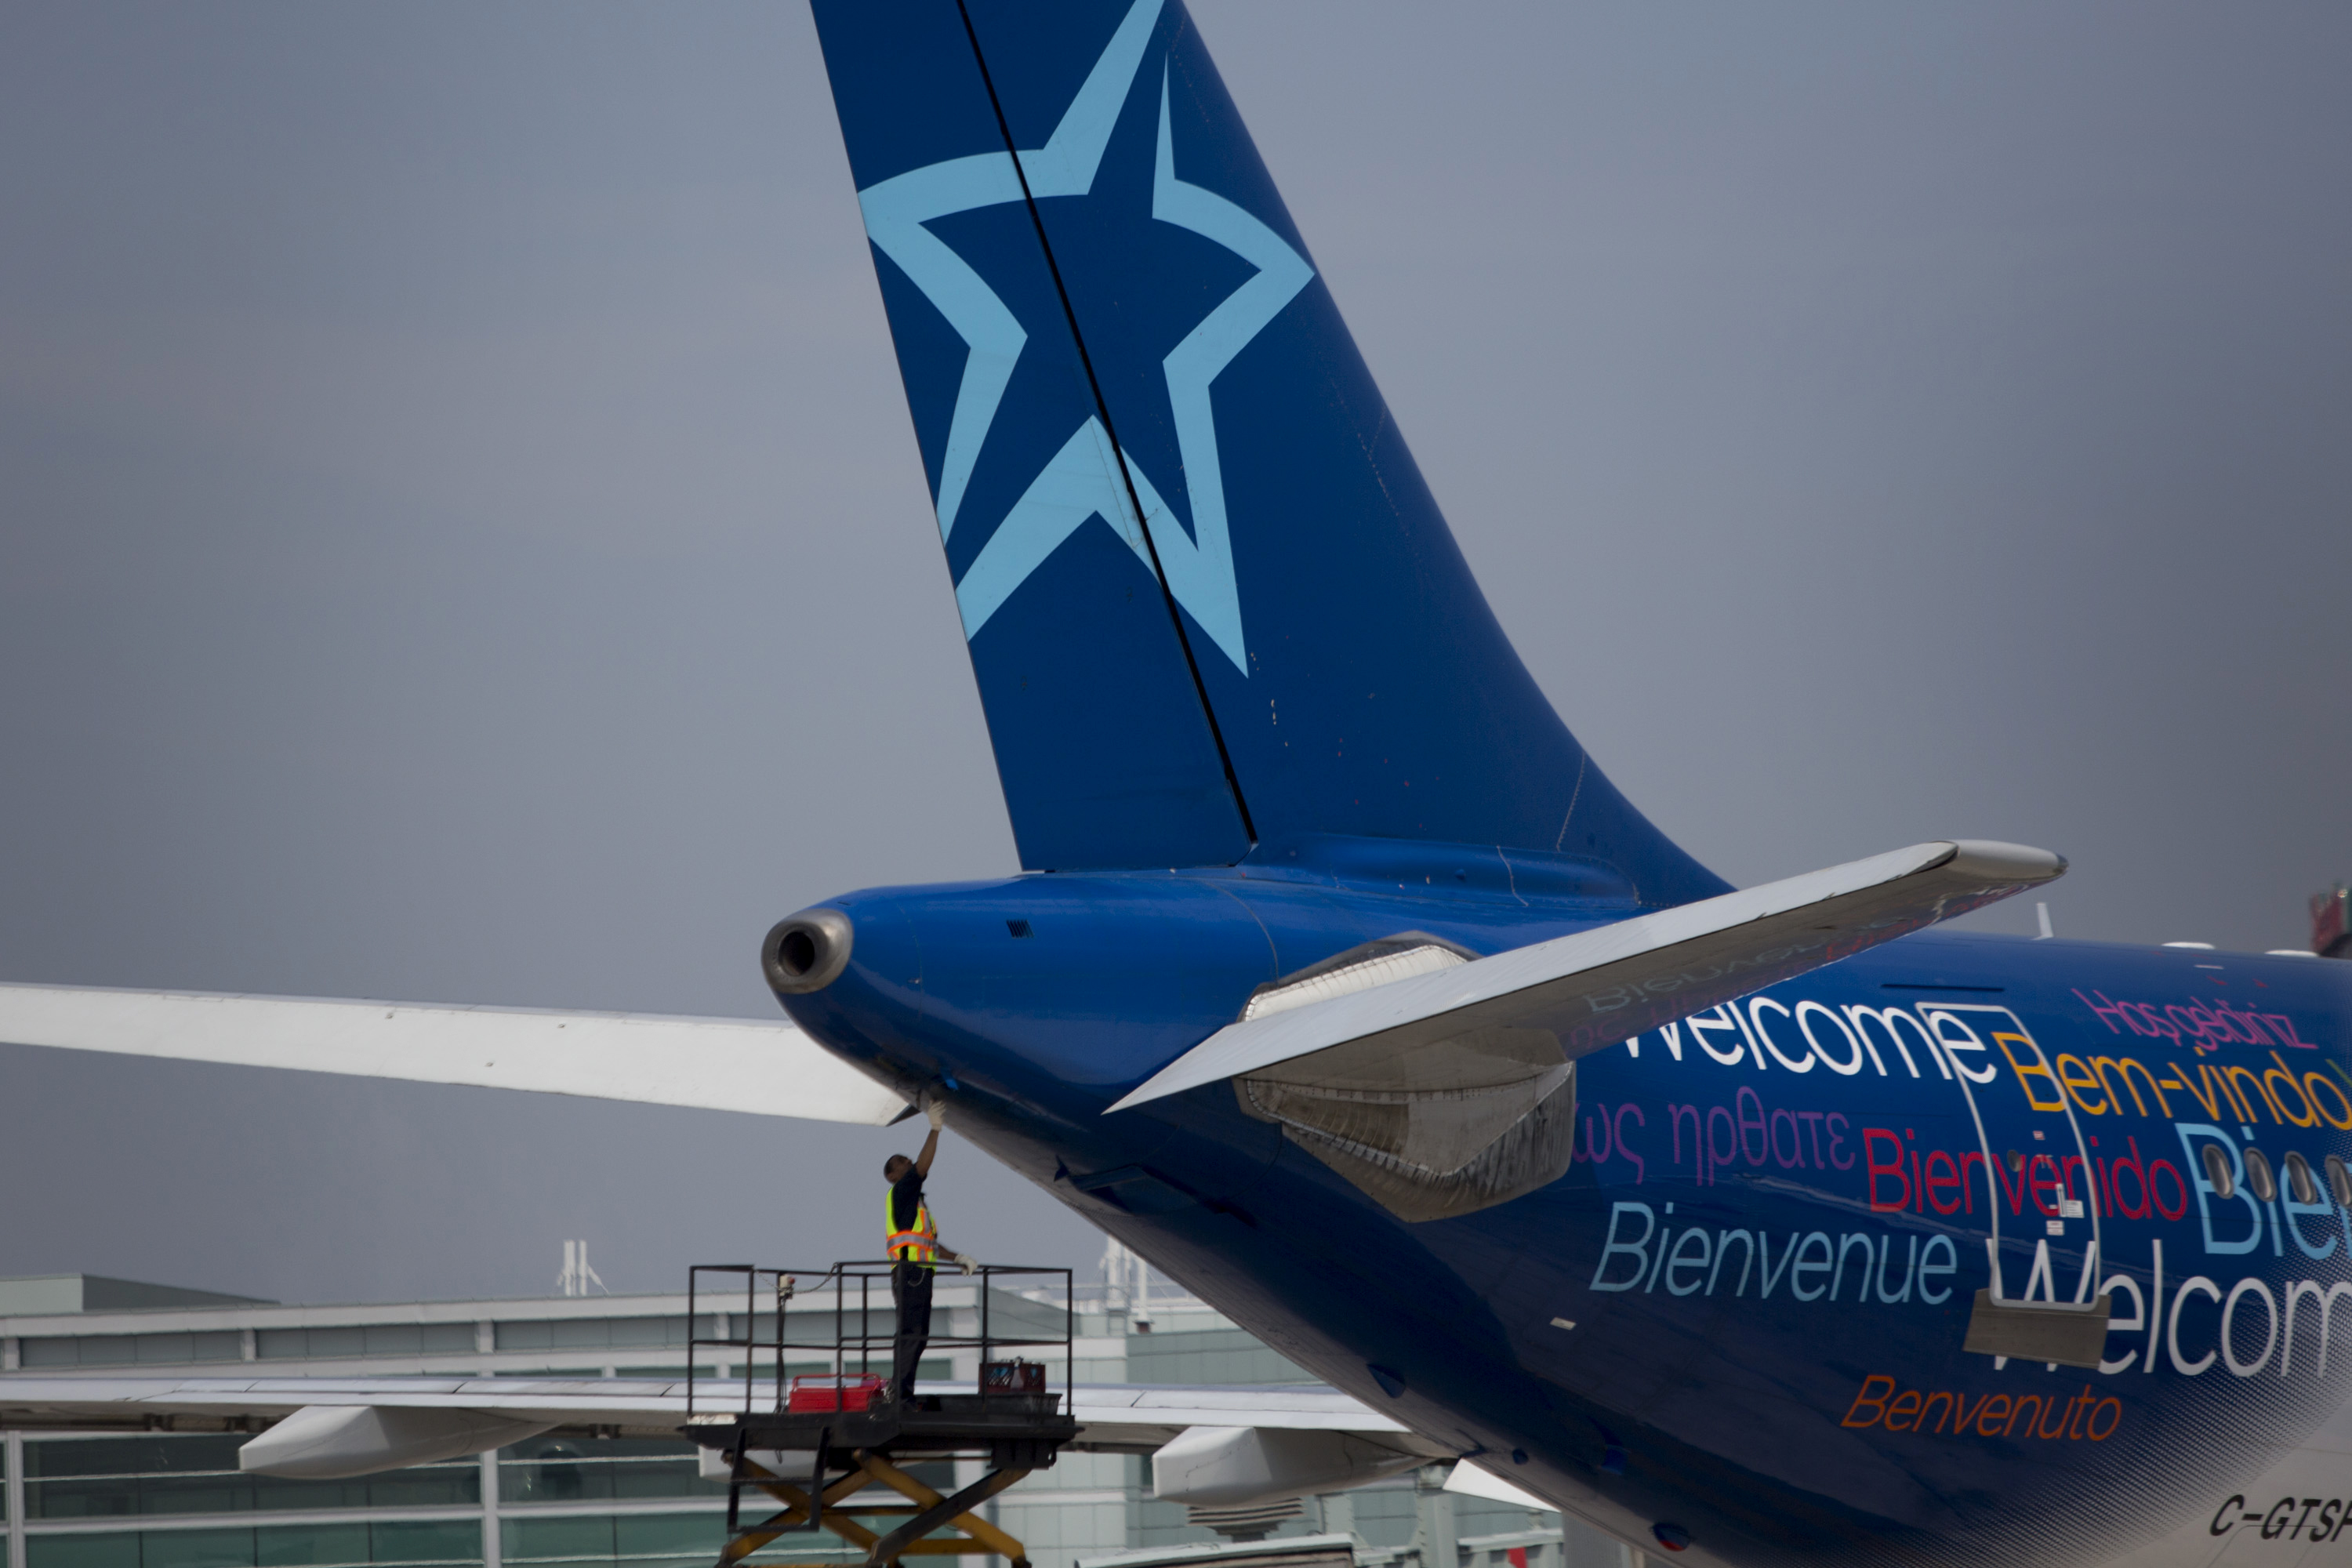 A worker inspects the rear of an Air Transat aircraft at Toronto Pearson International Airport in Toronto, Ontario, Canada, on July 3, 2013. (Brent Lewin—Bloomberg/Getty Images)